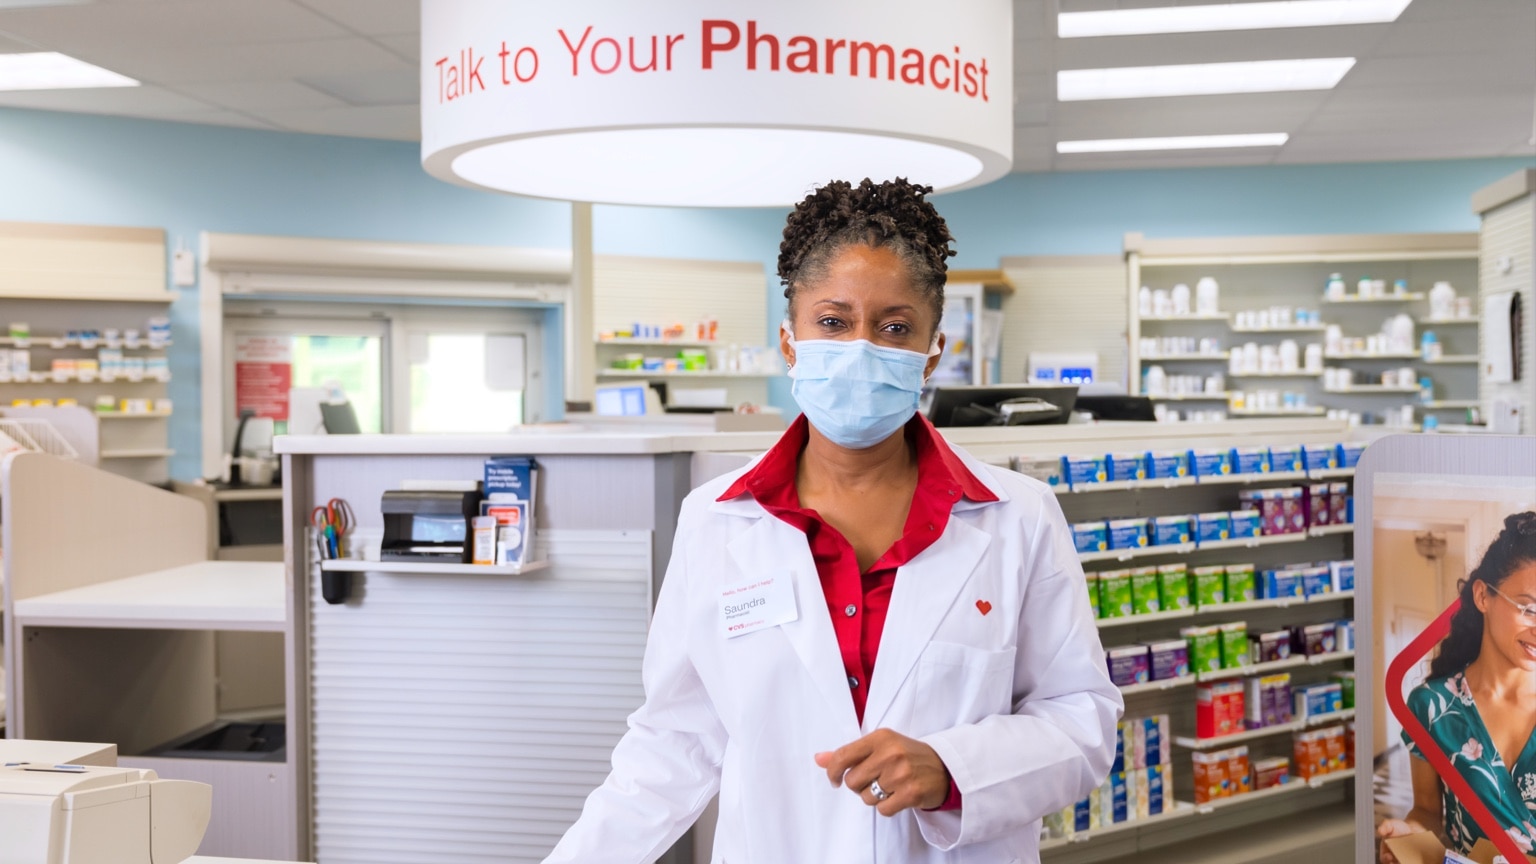 A CVS Pharmacist listens to questions from a patient.